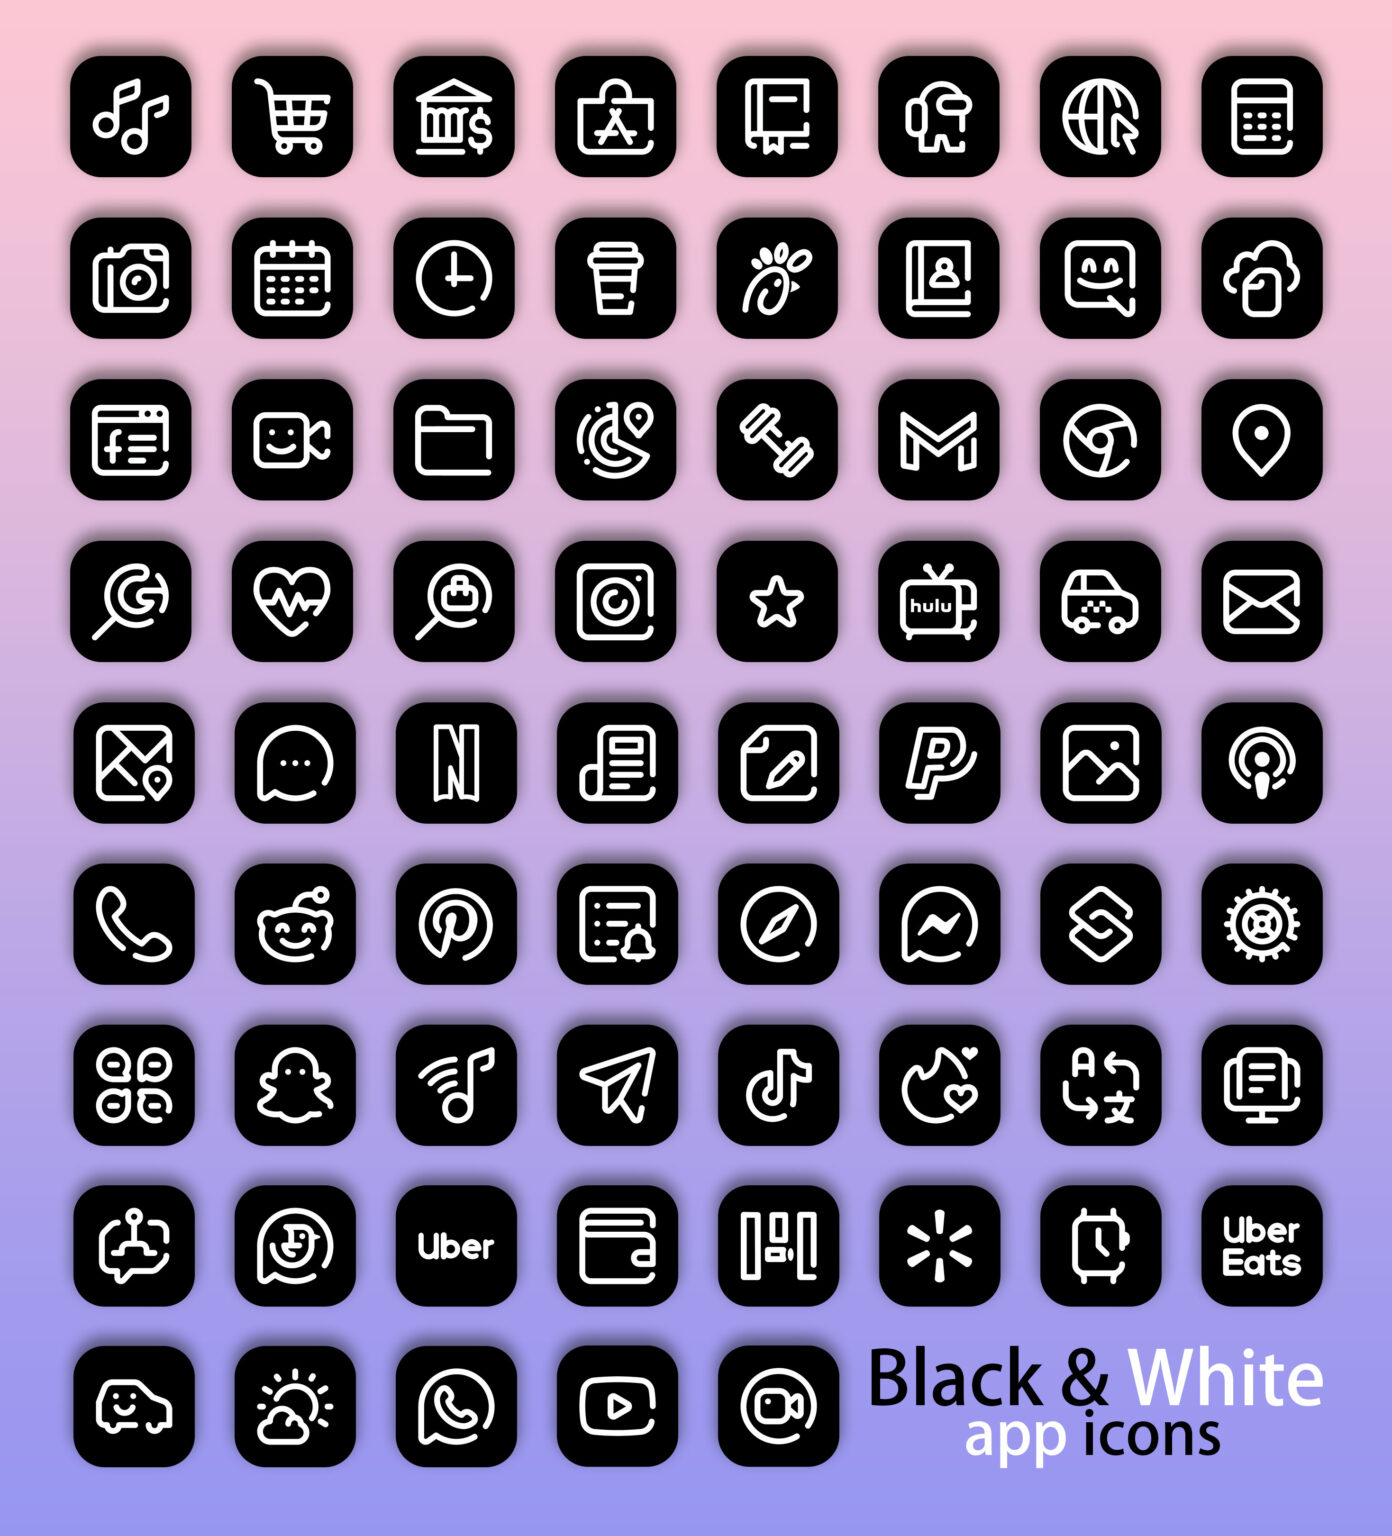 Free Black and White App Icons iPhone - Aesthetic Black App Icons iOS 14